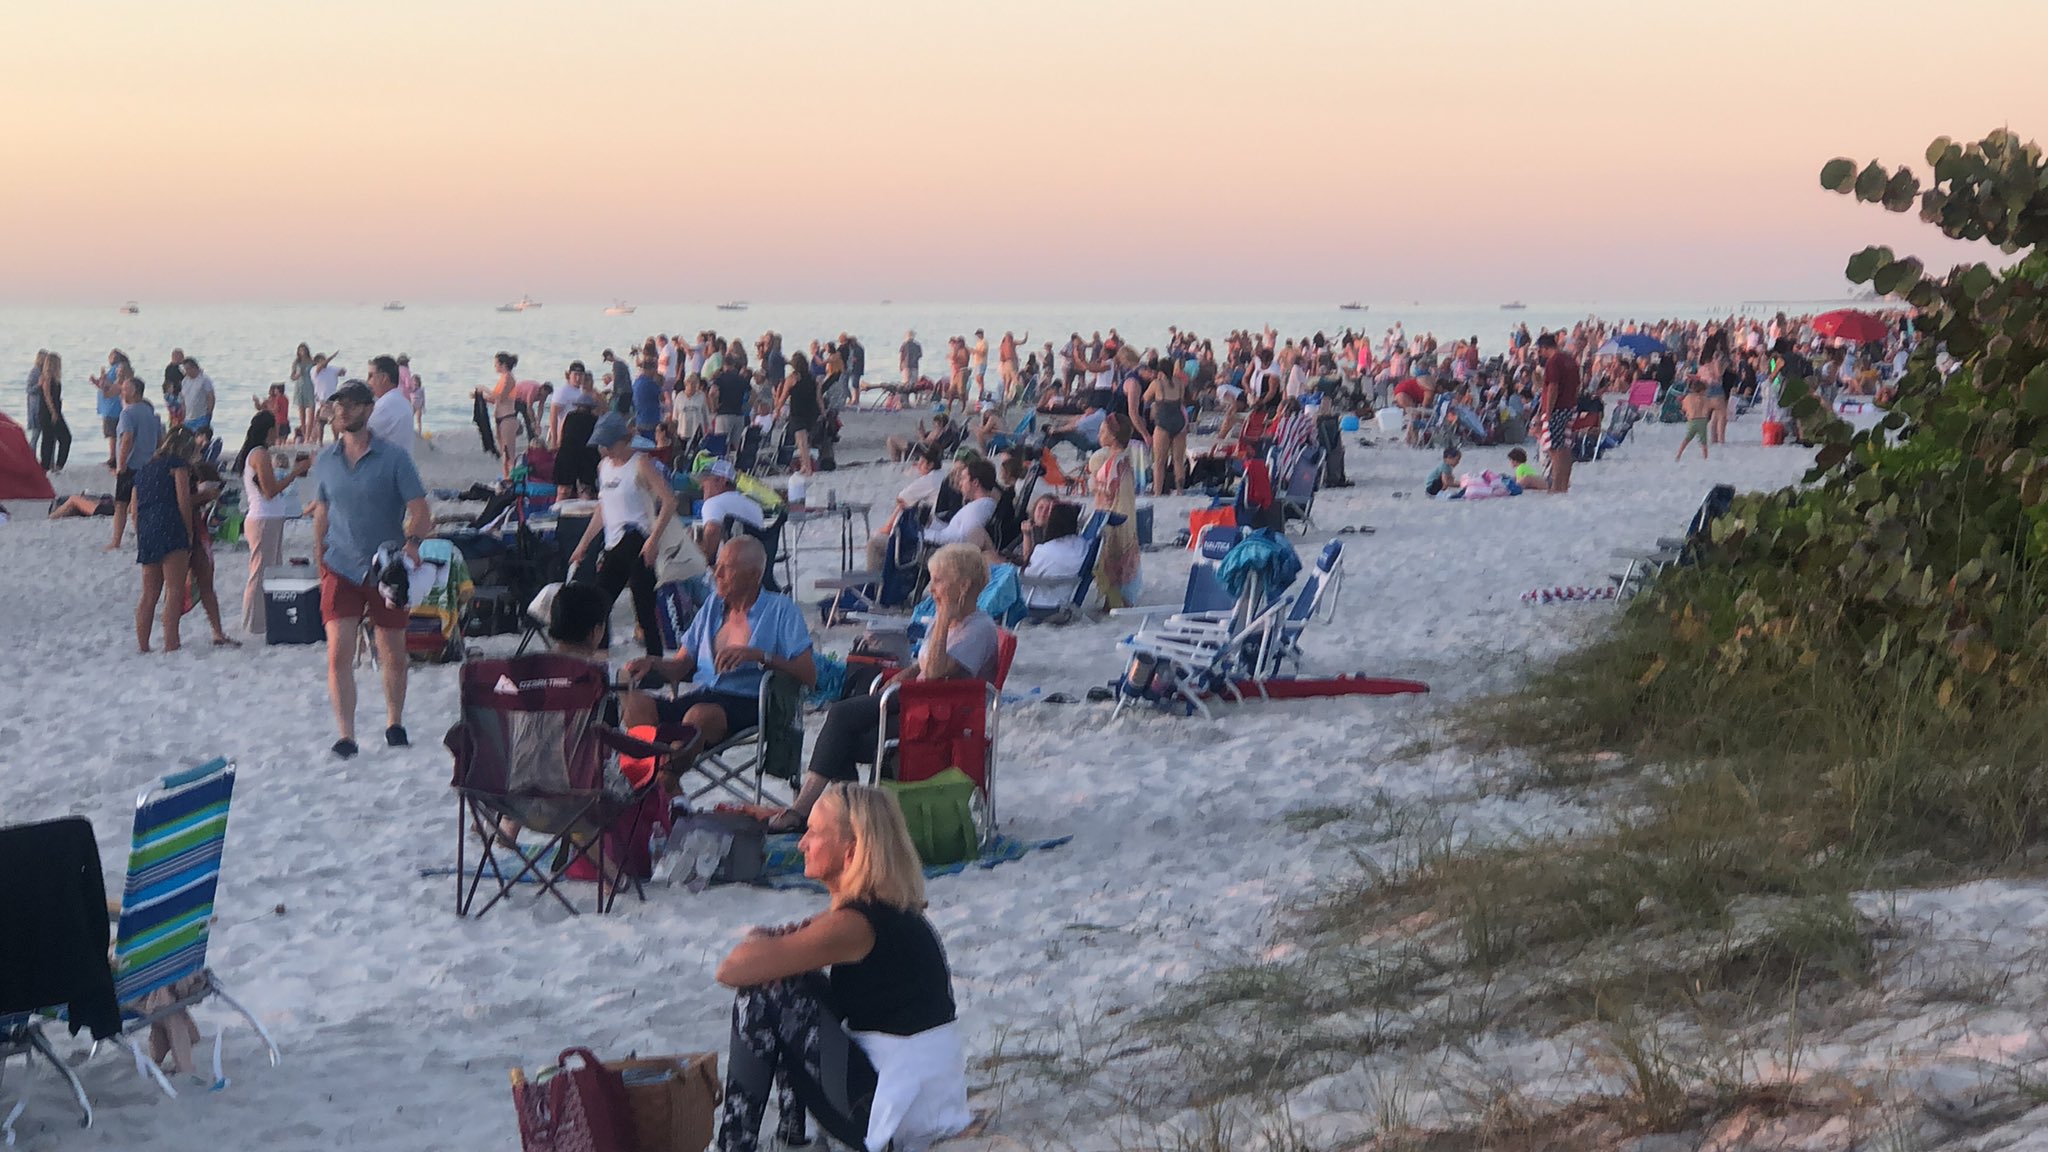 Thousands headed to New Year's Eve celebration in Naples Where to park